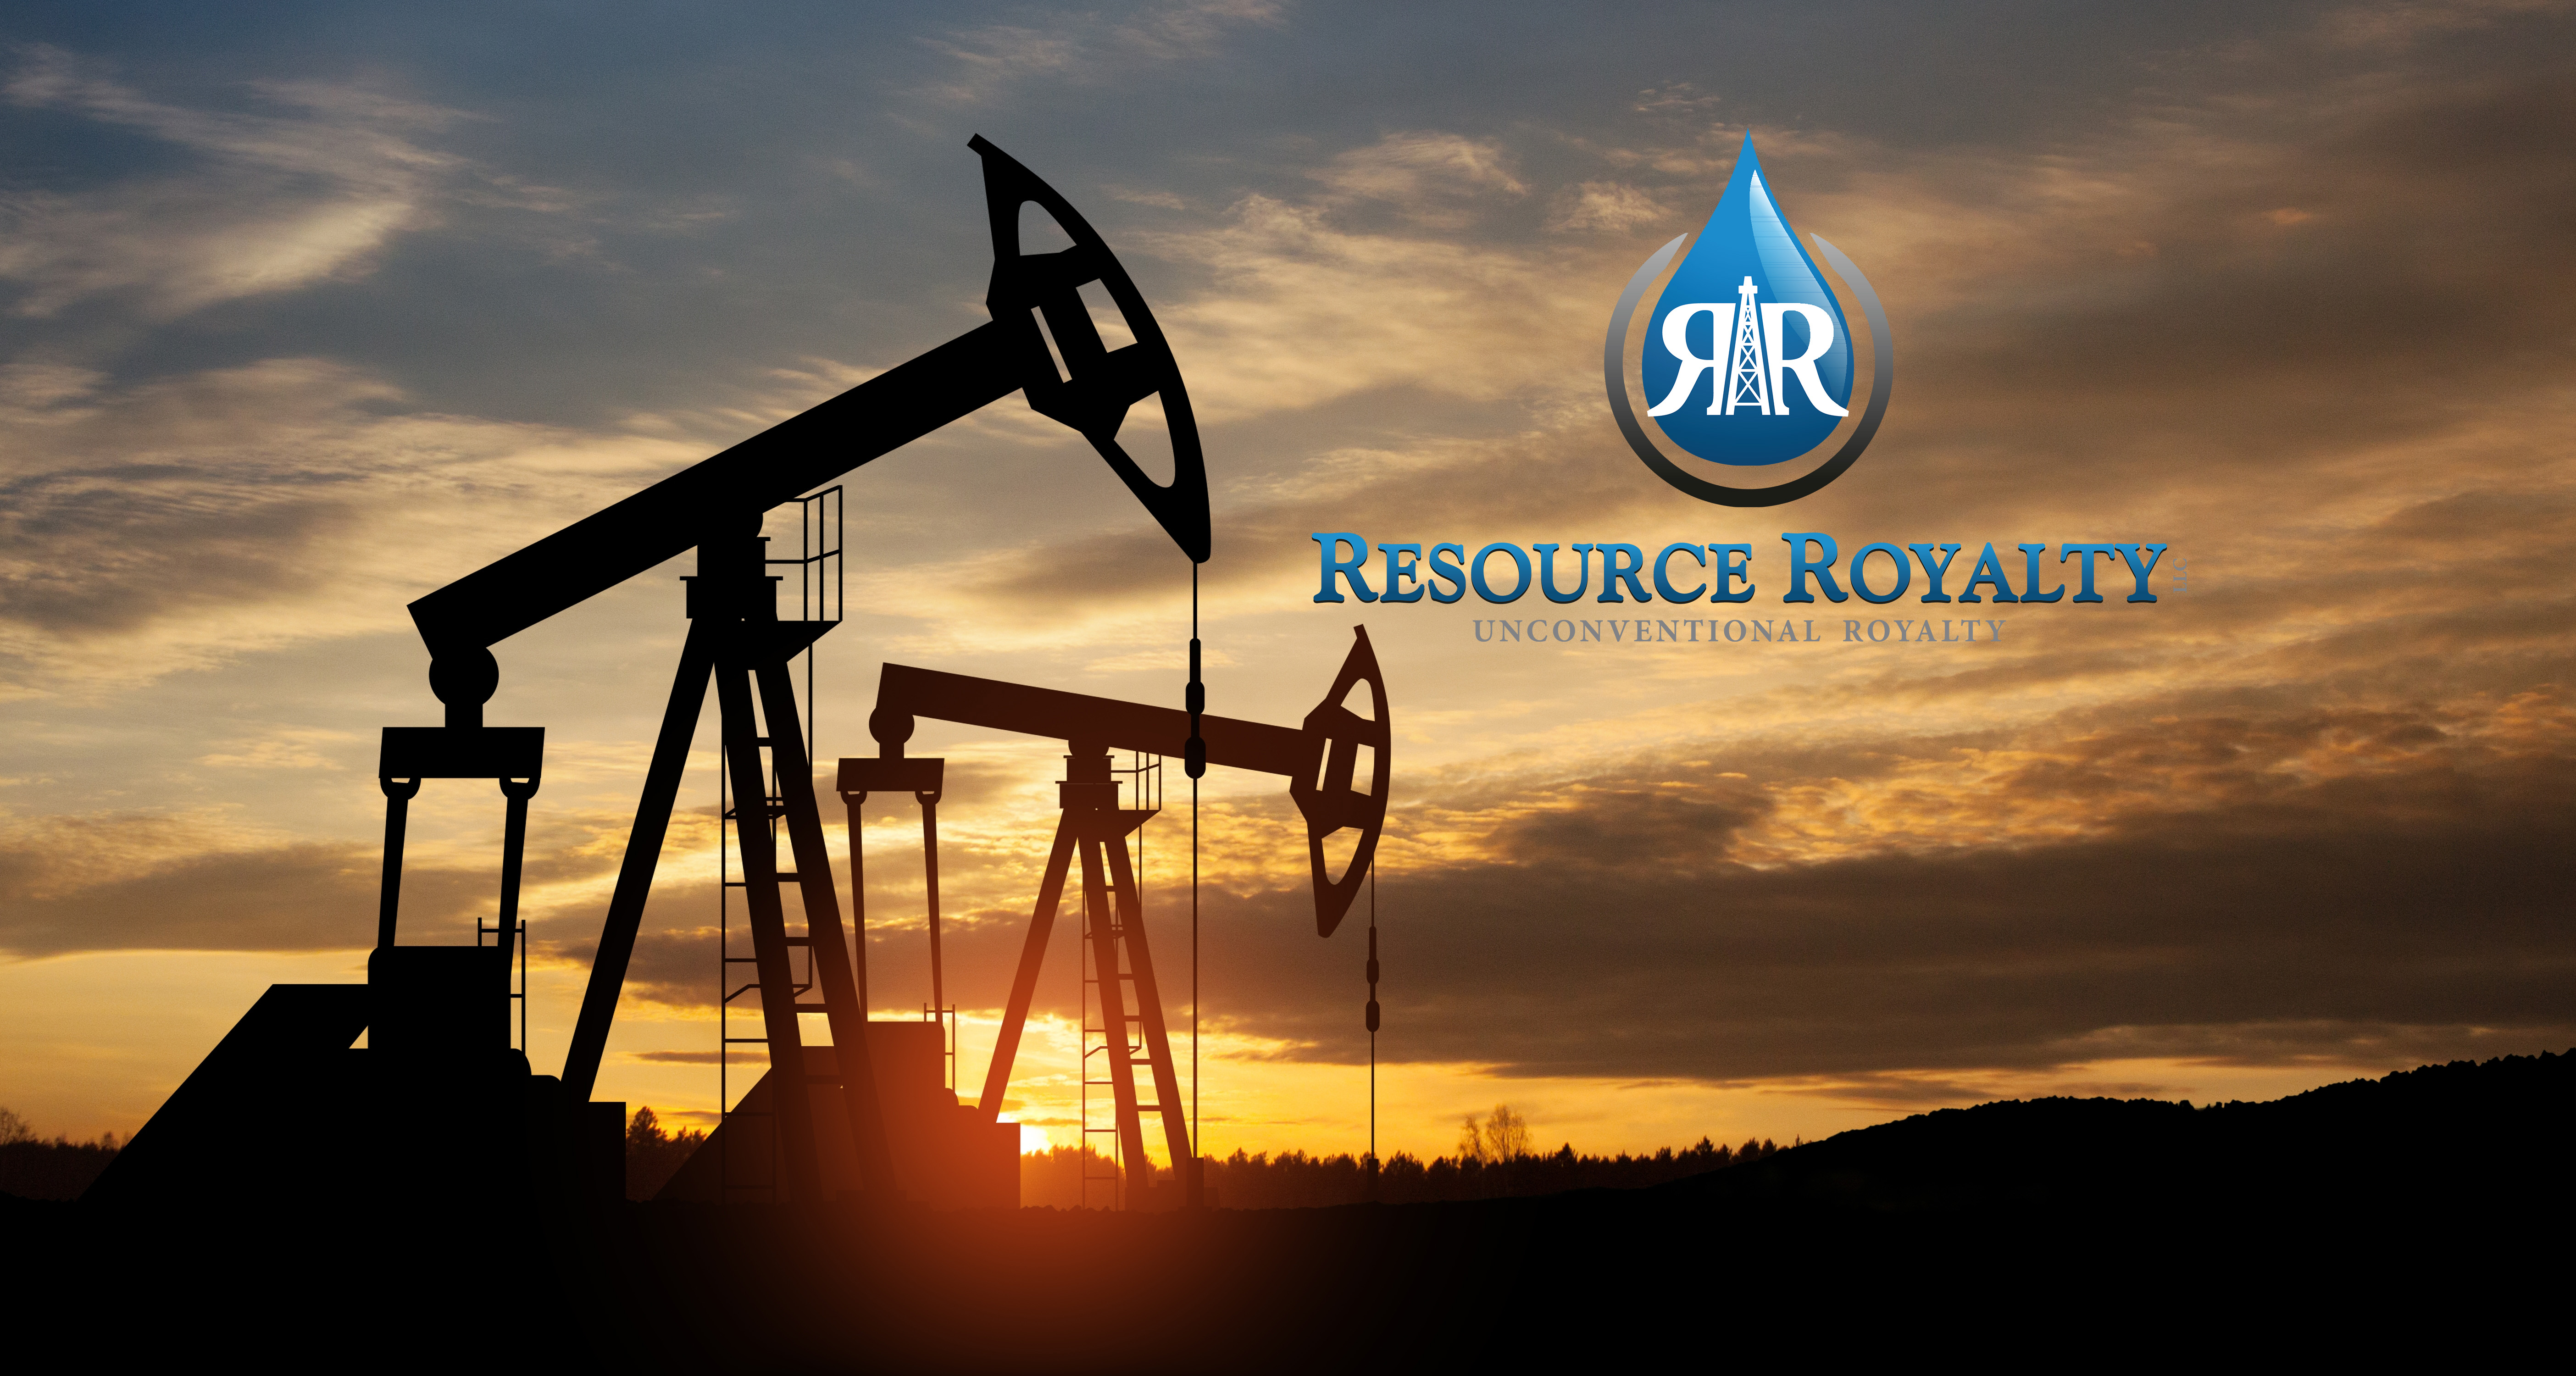 Resource Royalty Announces the Closing of Resource Royalty XX, LLC